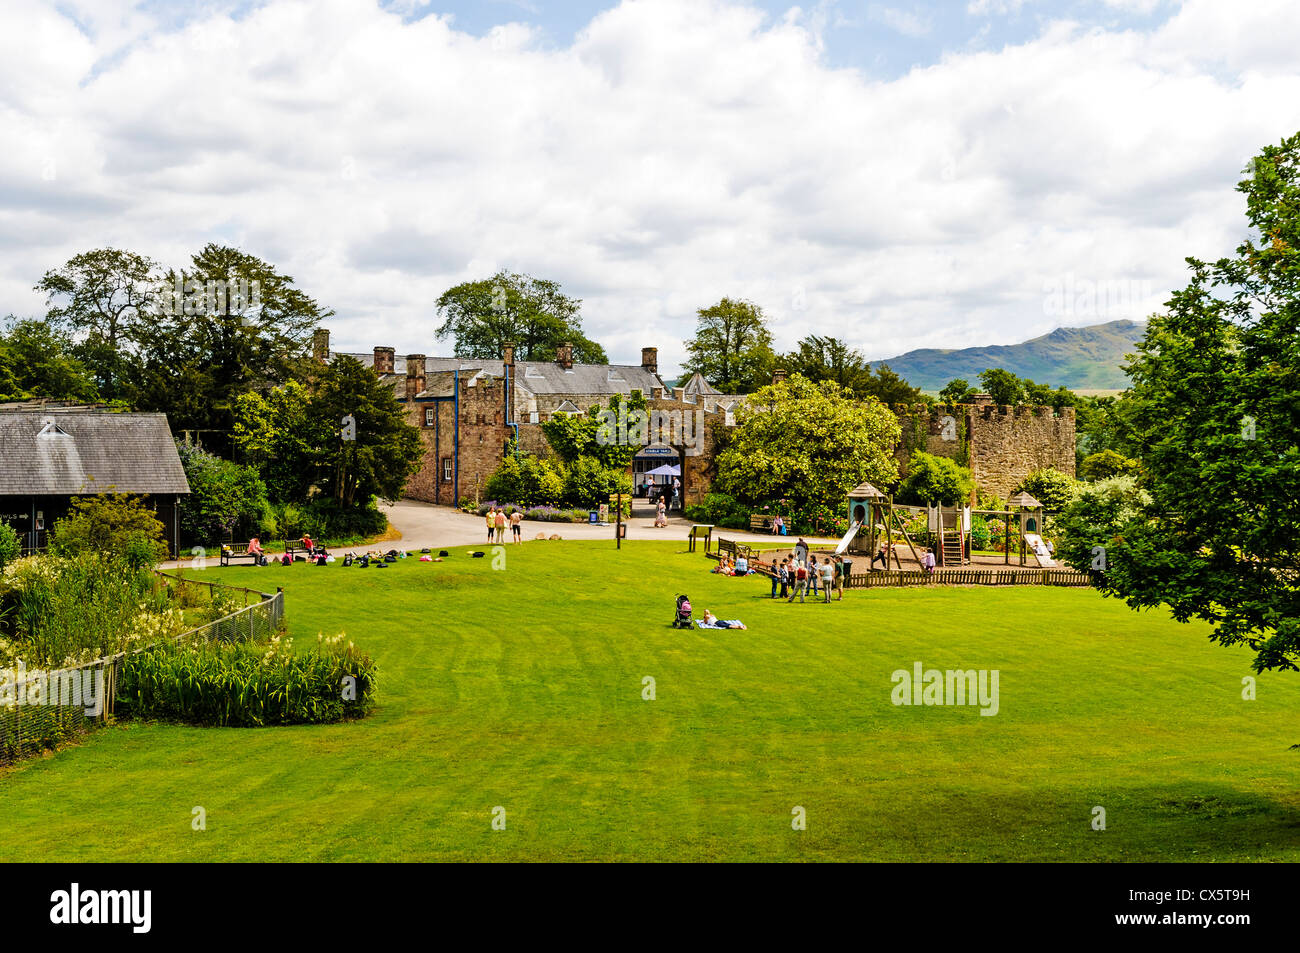 A green pleasant lawn with a modern children's play area for relaxation and picnics opposite the old stables, Muncaster Castle Stock Photo